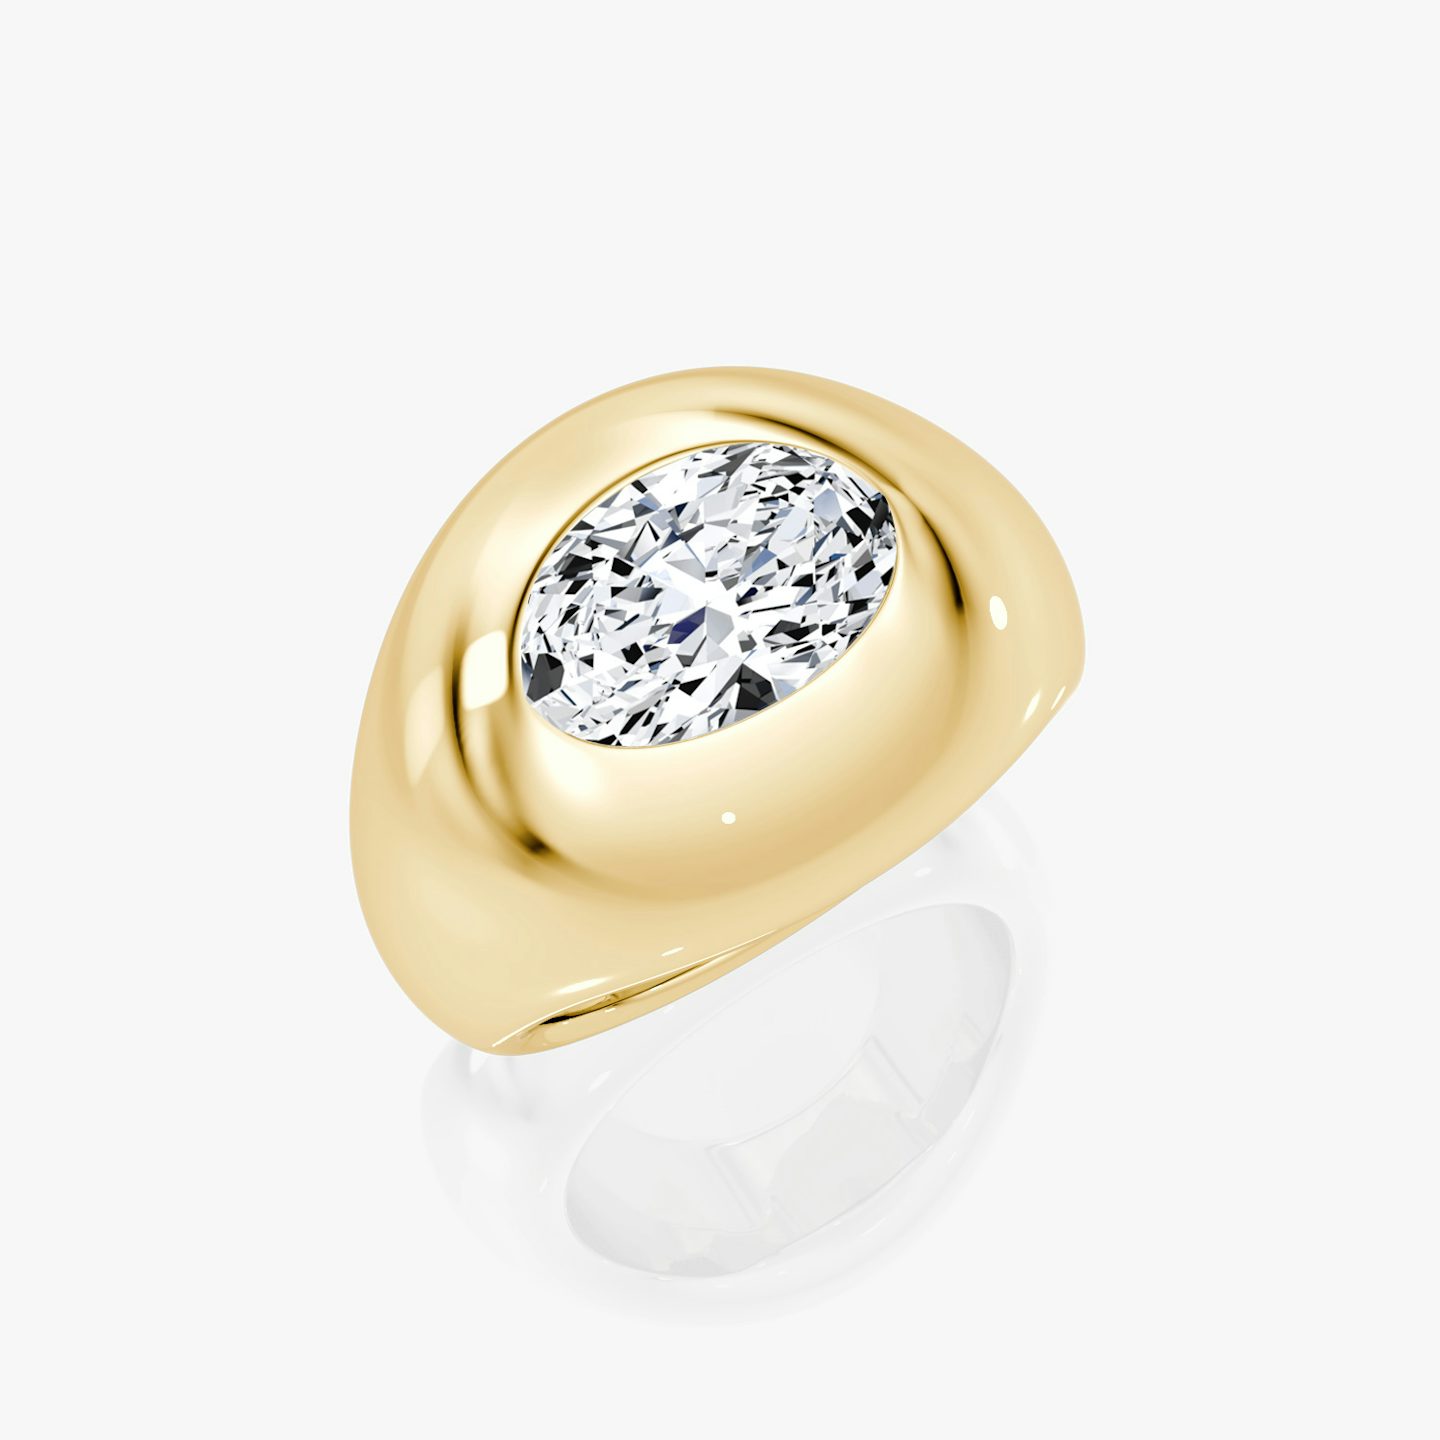 Oval Dome Ring | Oval | 14k | 18k Gelbgold